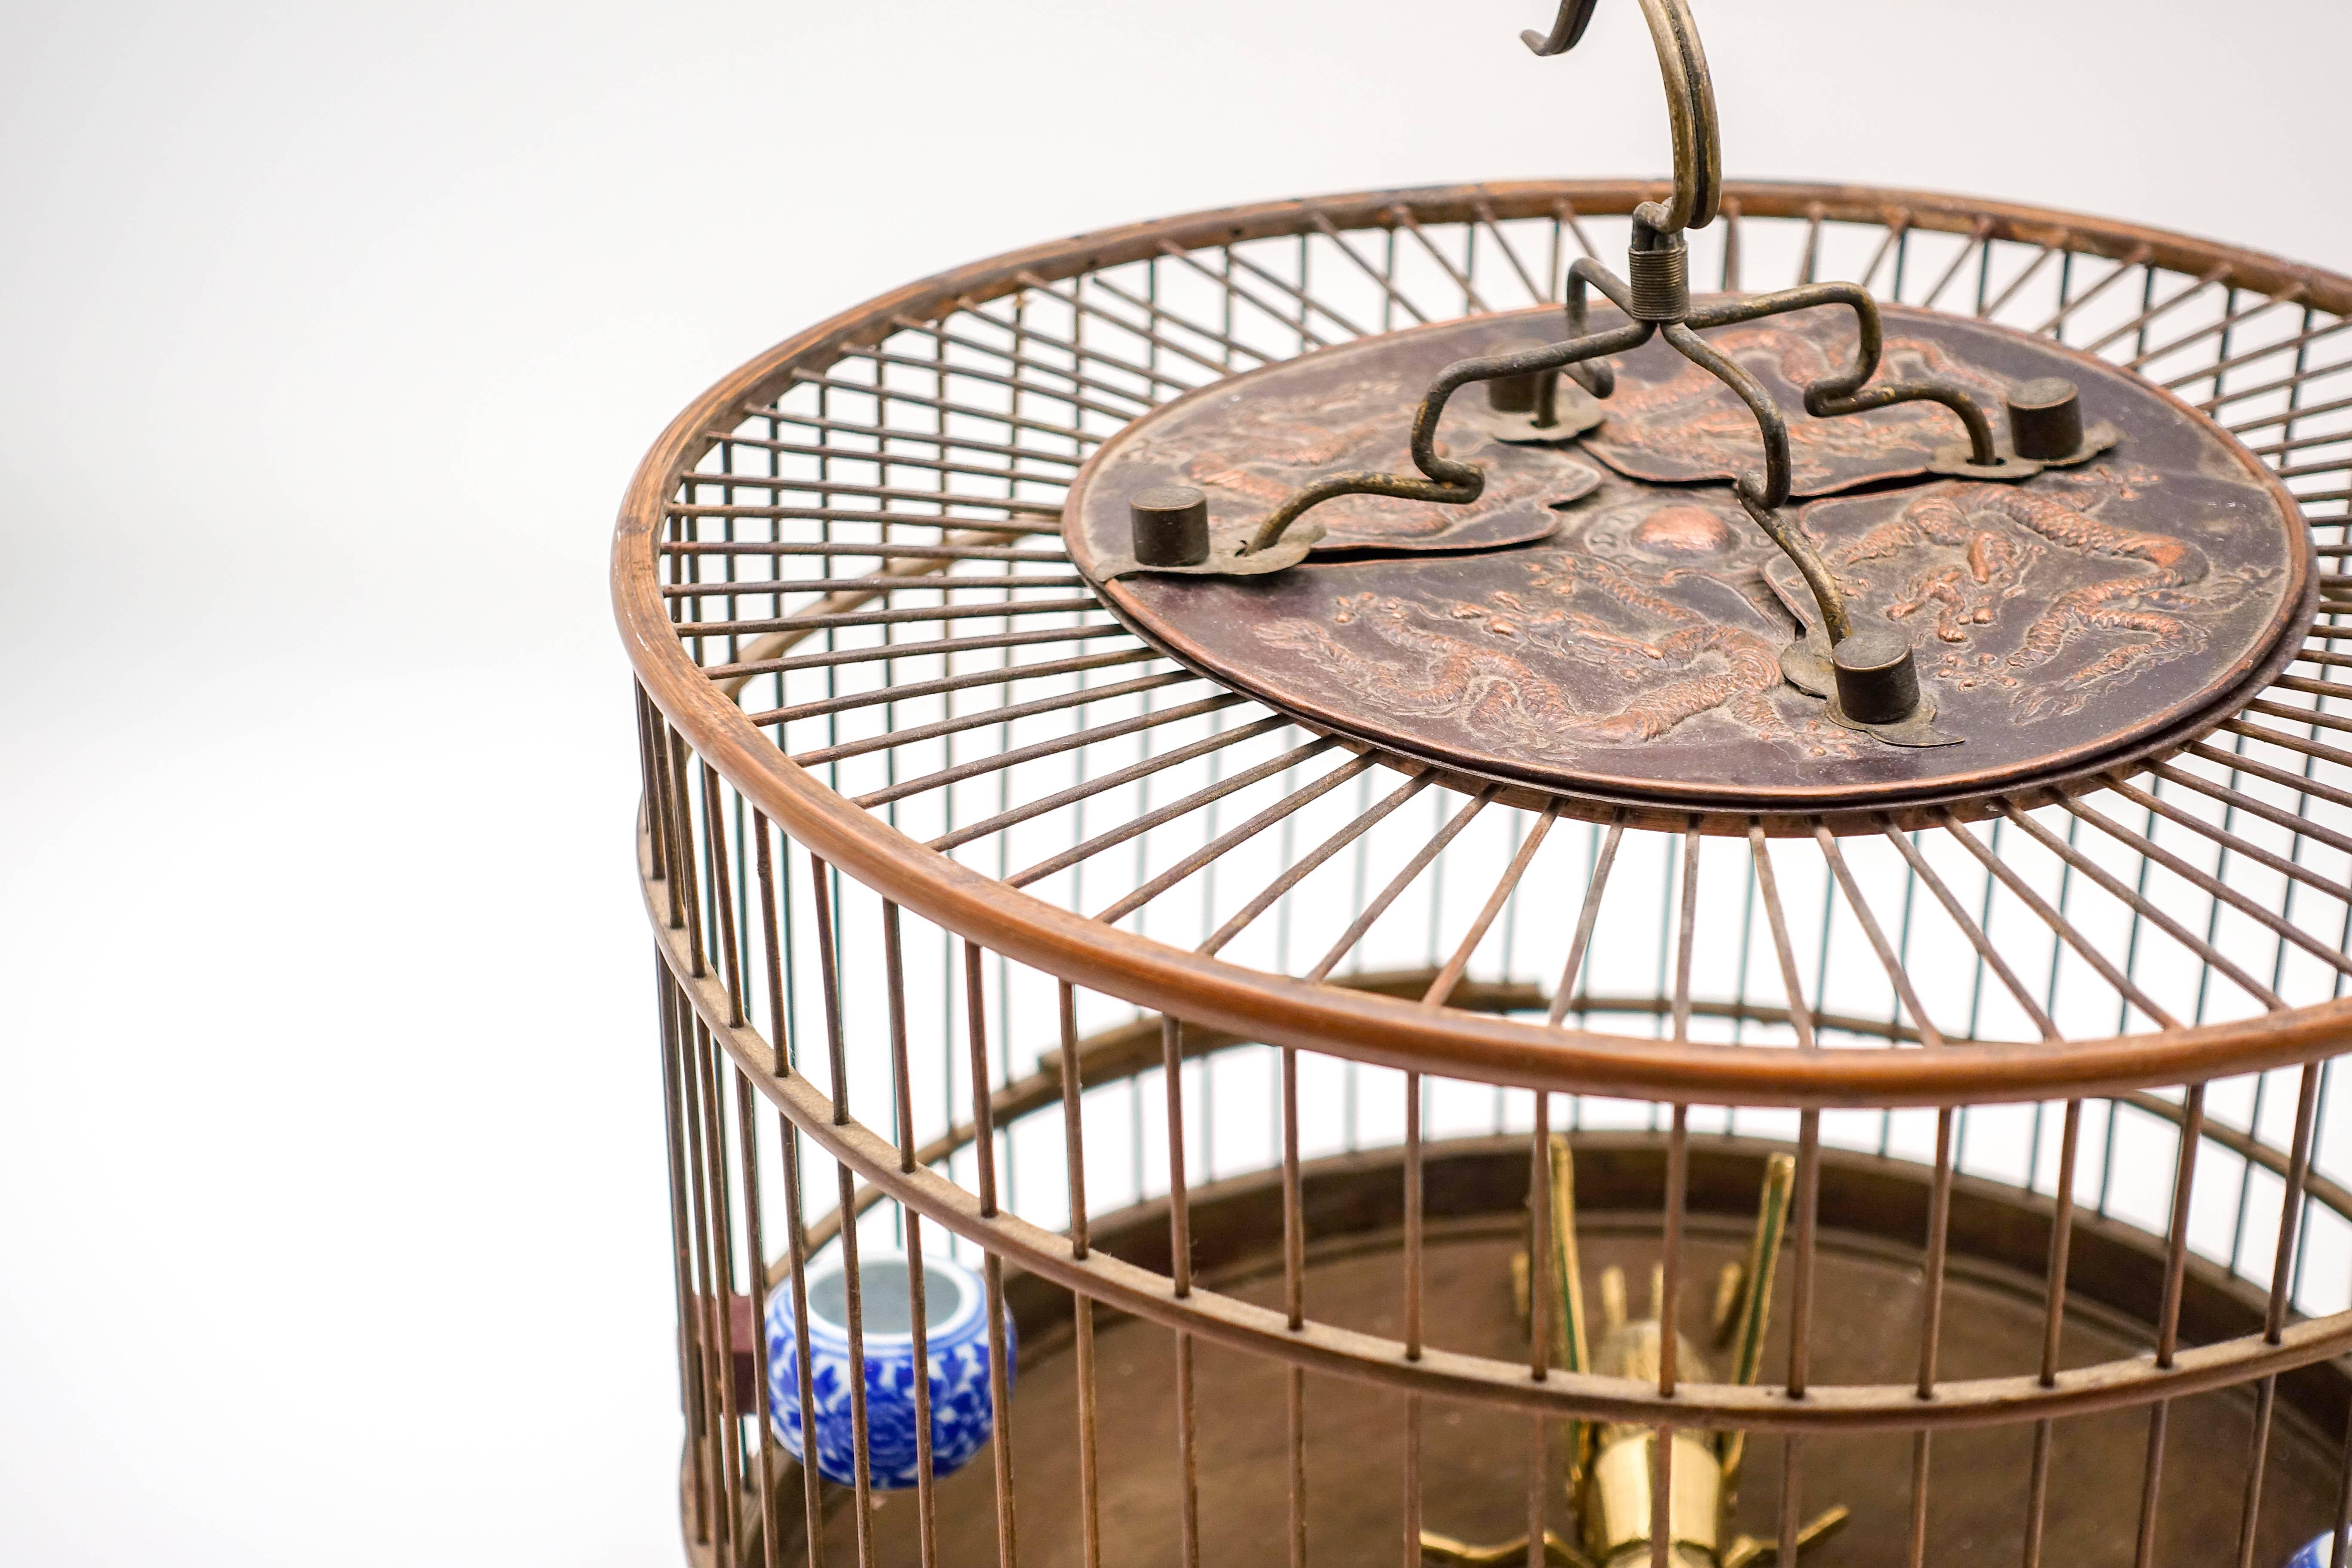 Qing Cricket Cage with Brass Cricket and a Taxidermy Budgie